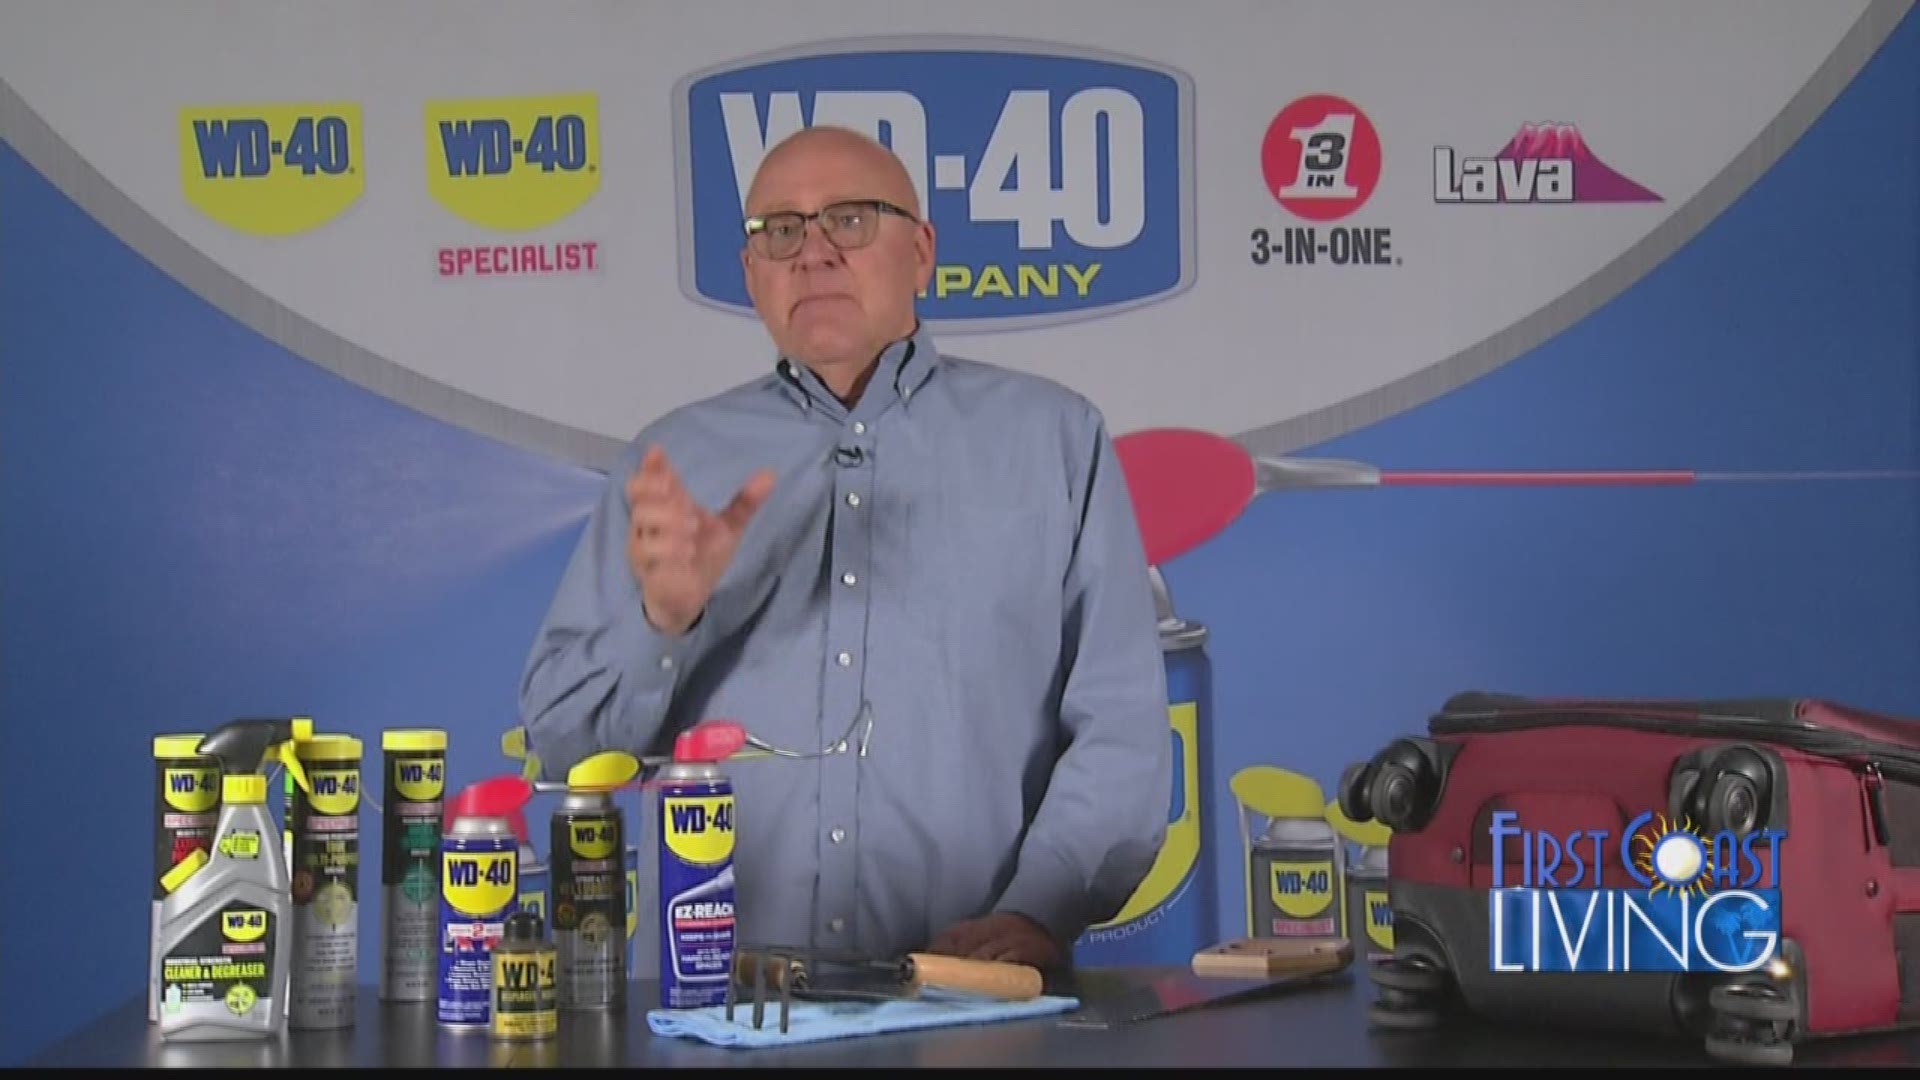 How do you use your WD-40